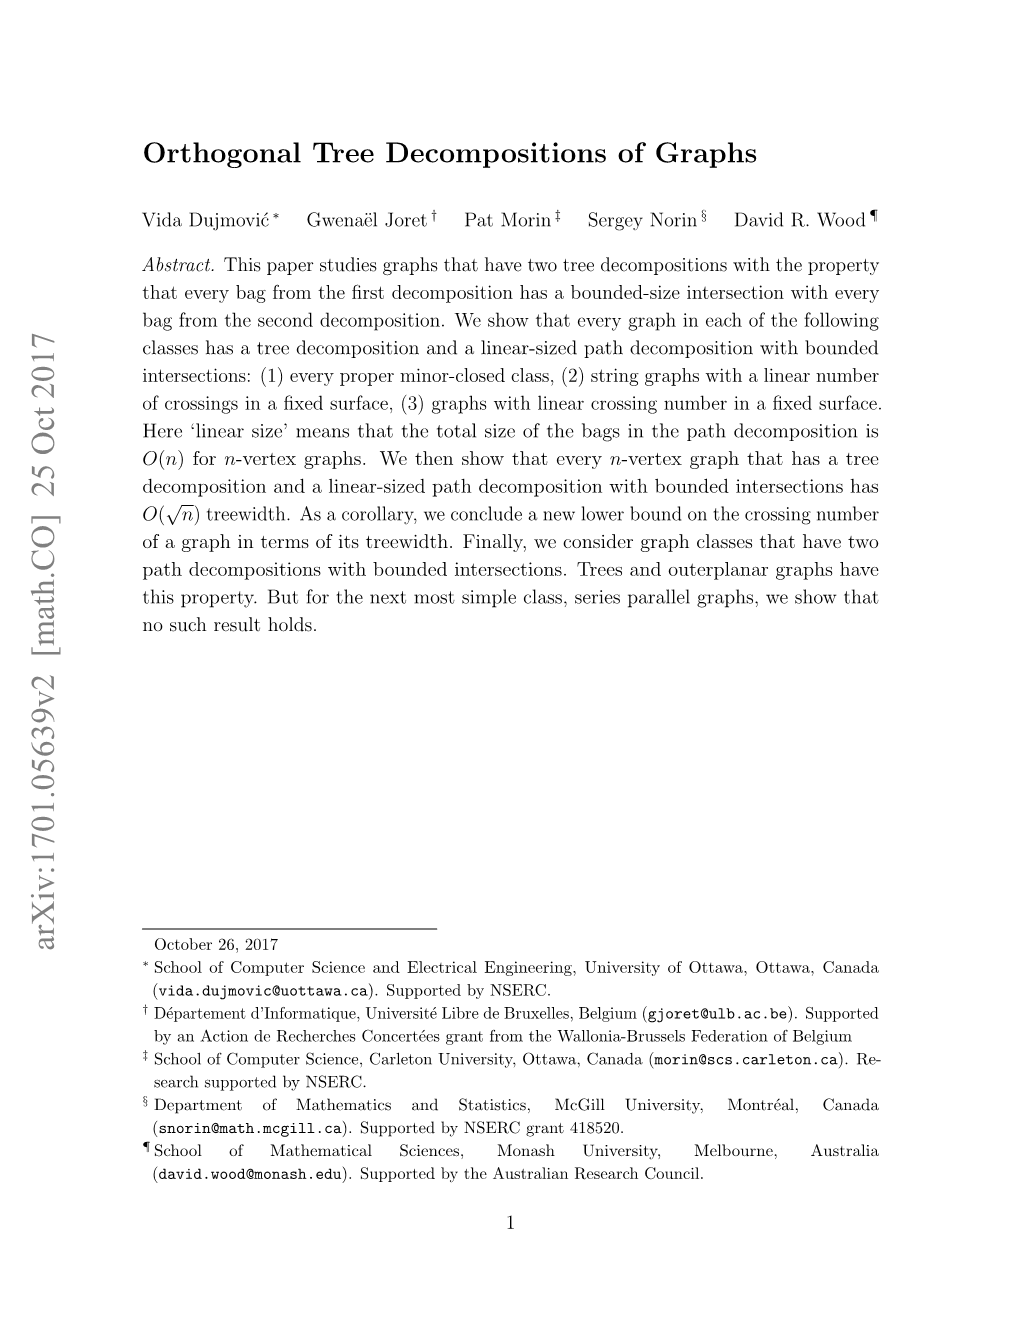 Orthogonal Tree Decompositions of Graphs